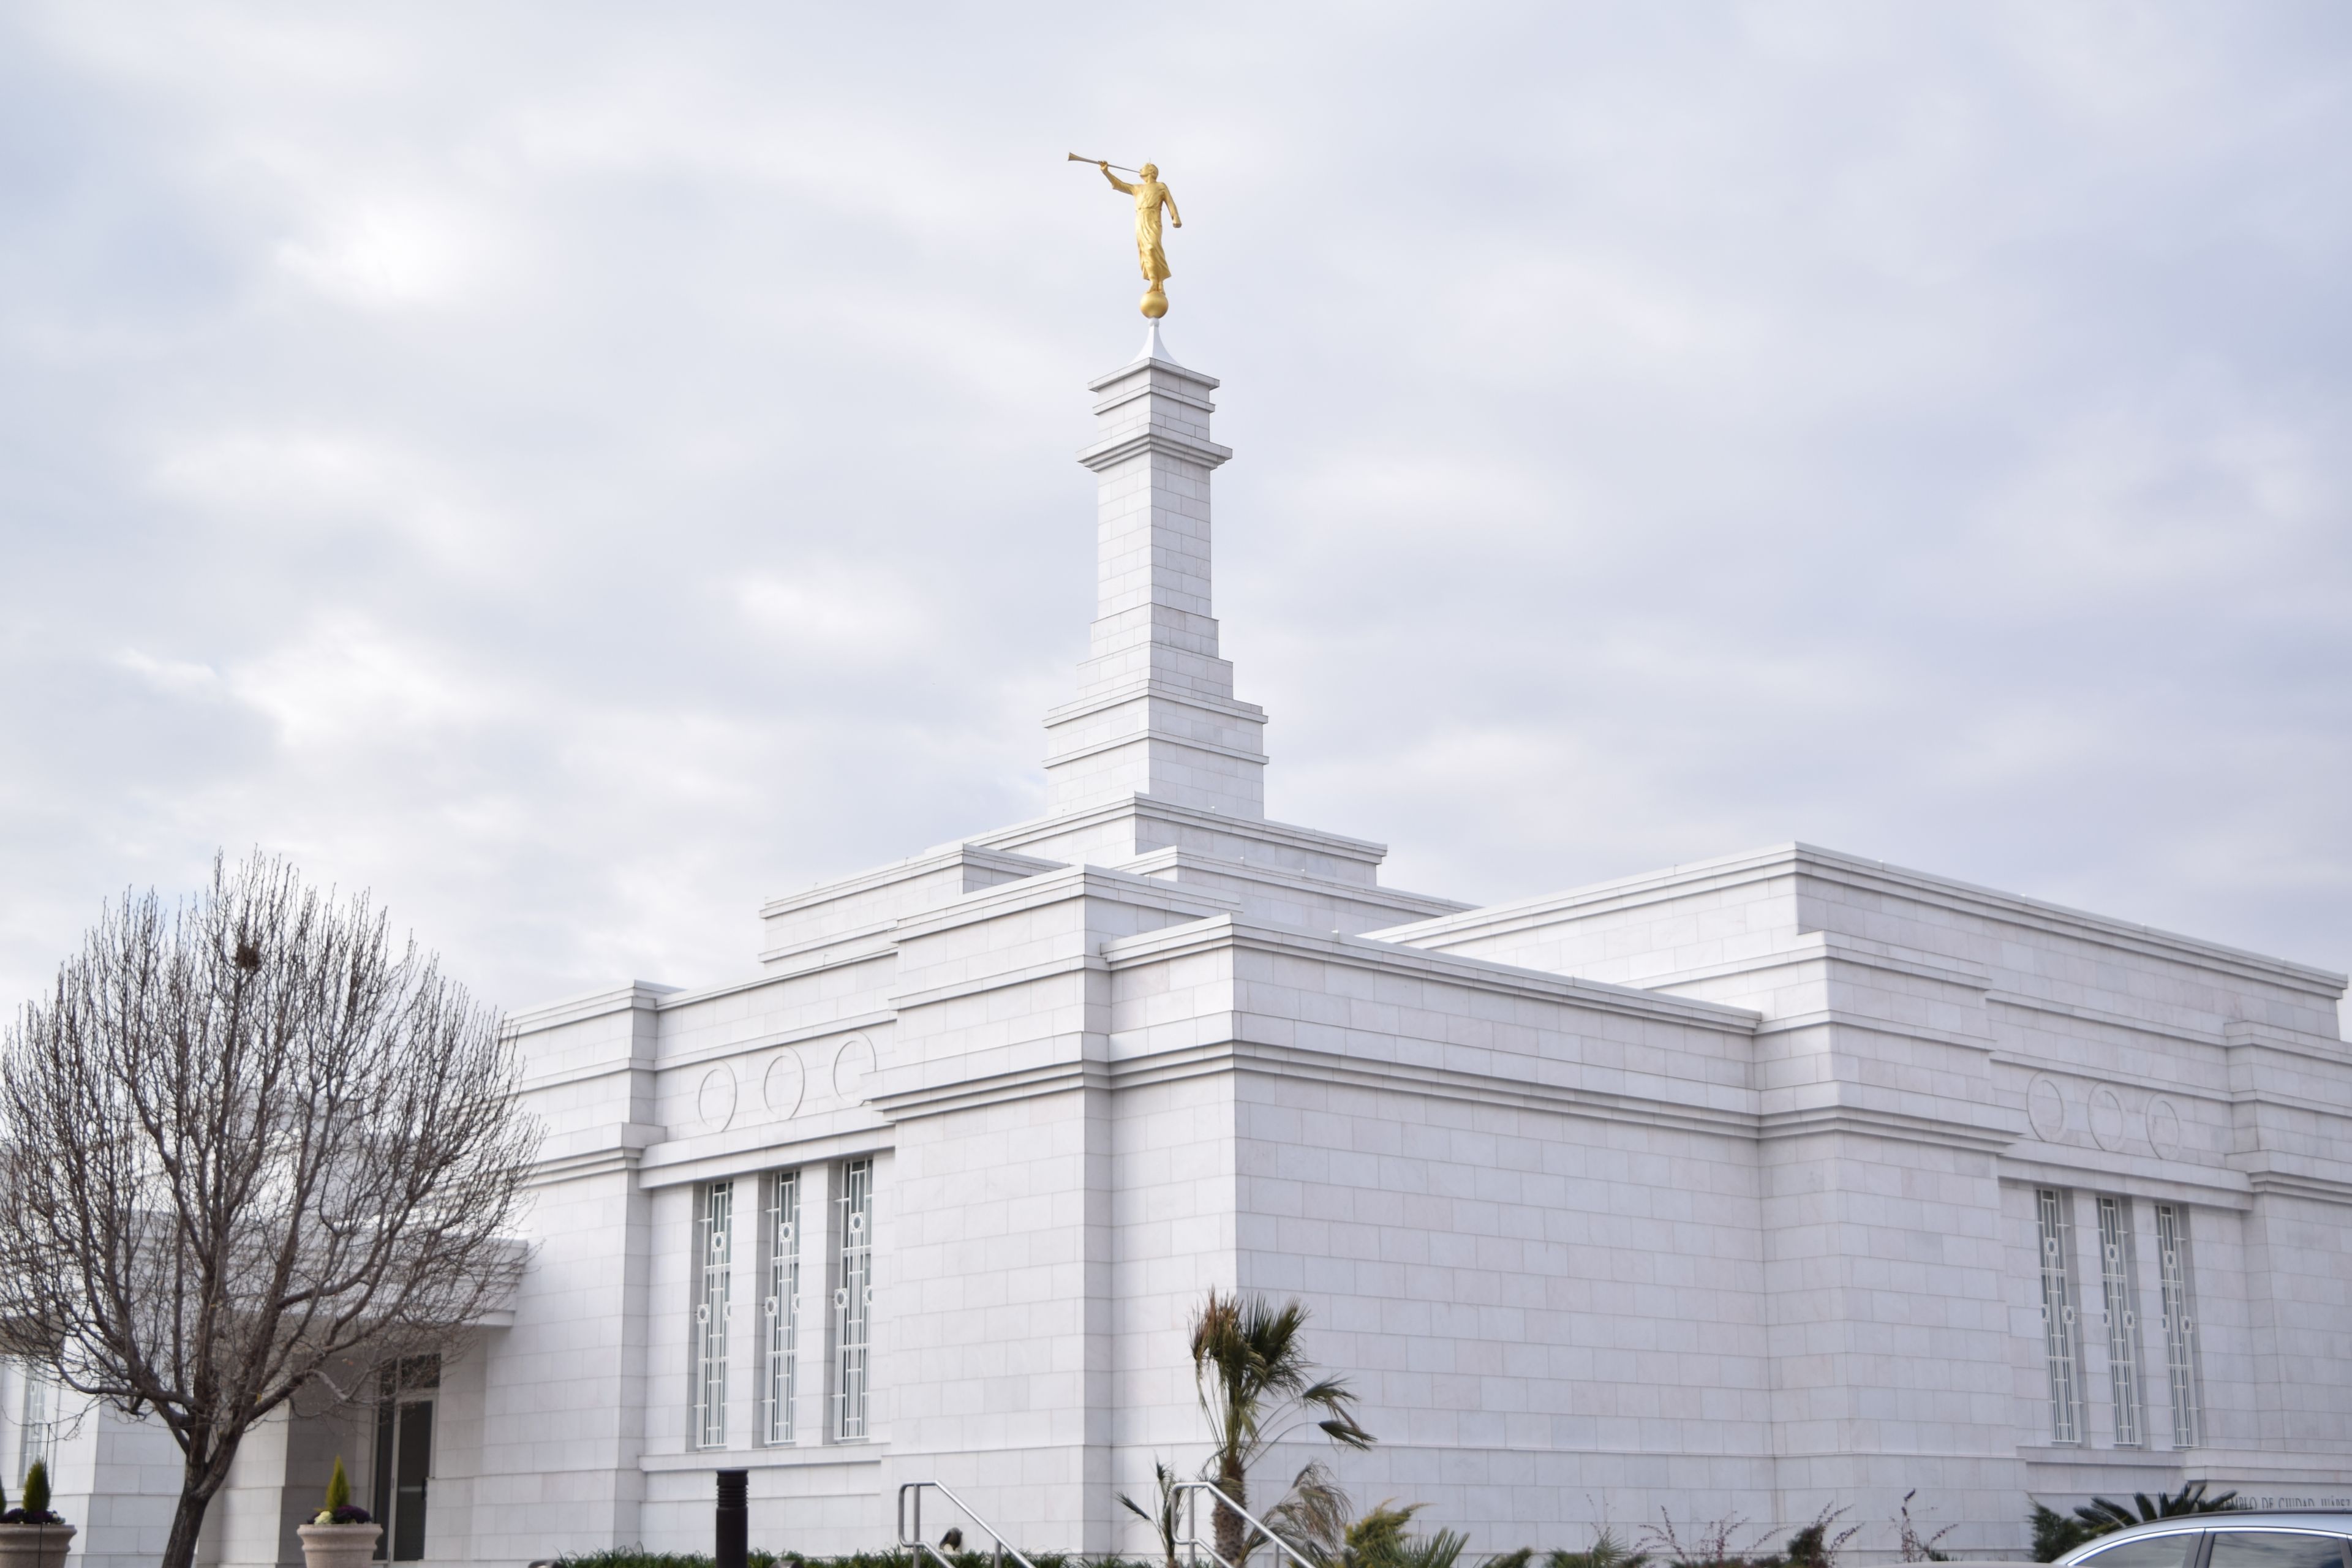 A side view of the Ciudad Juárez Mexico Temple during the daytime.